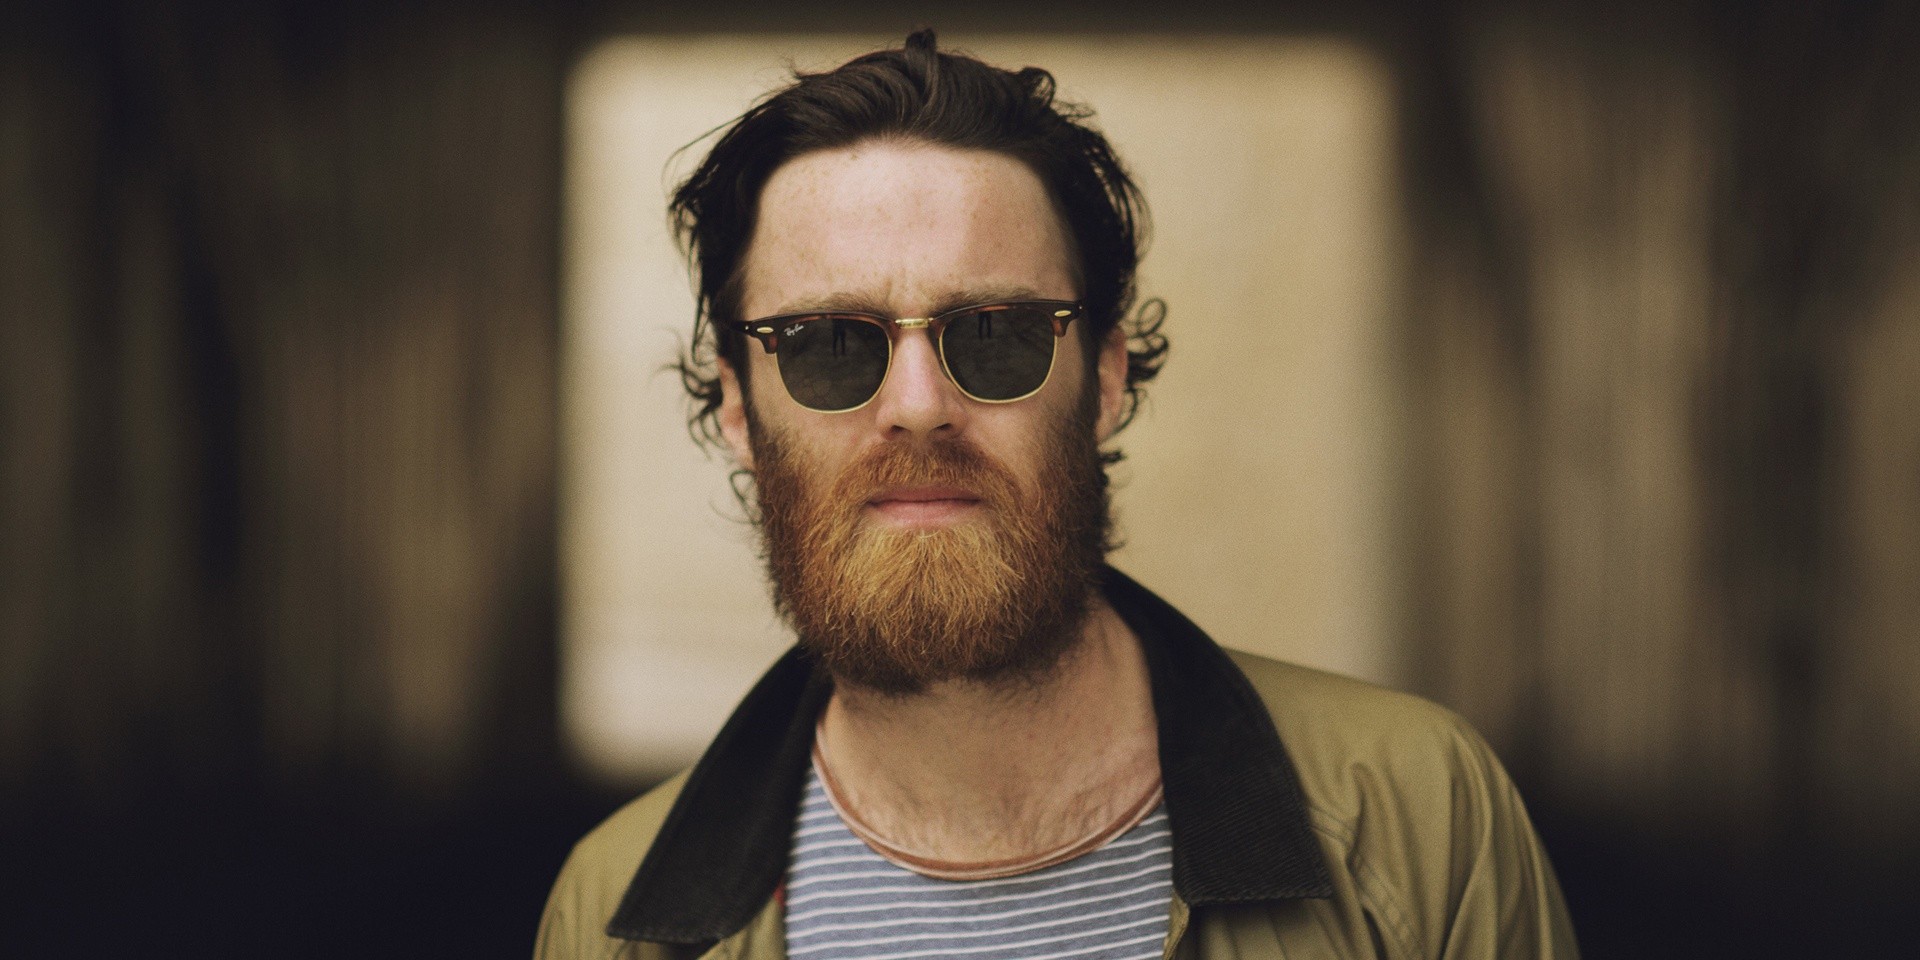 The artist formerly known as Chet Faker will perform at Laneway Festival Singapore next year